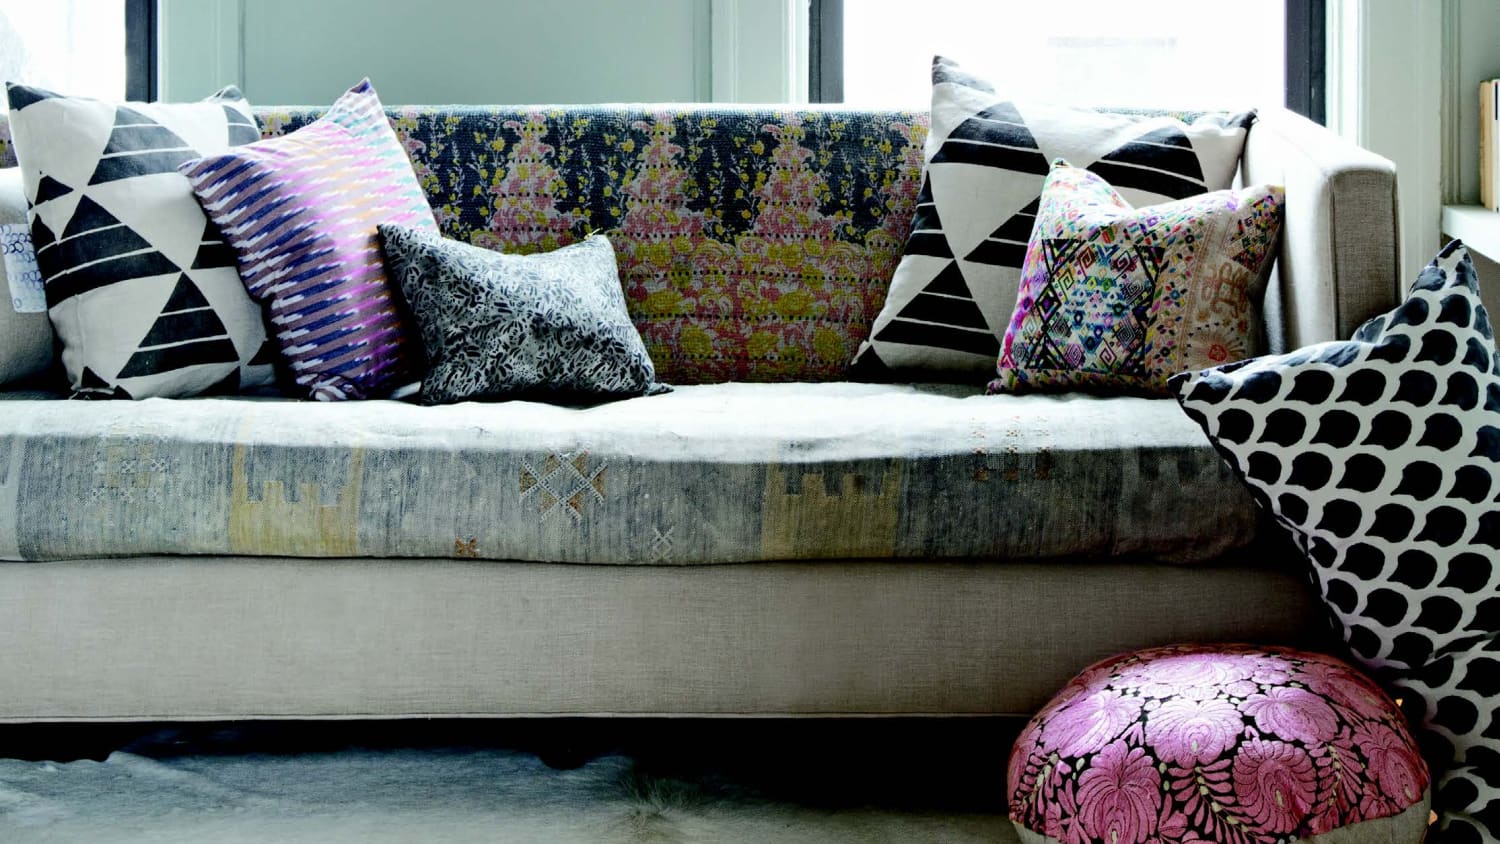 Replacement Couch Pillows - Bring life back to your old couch